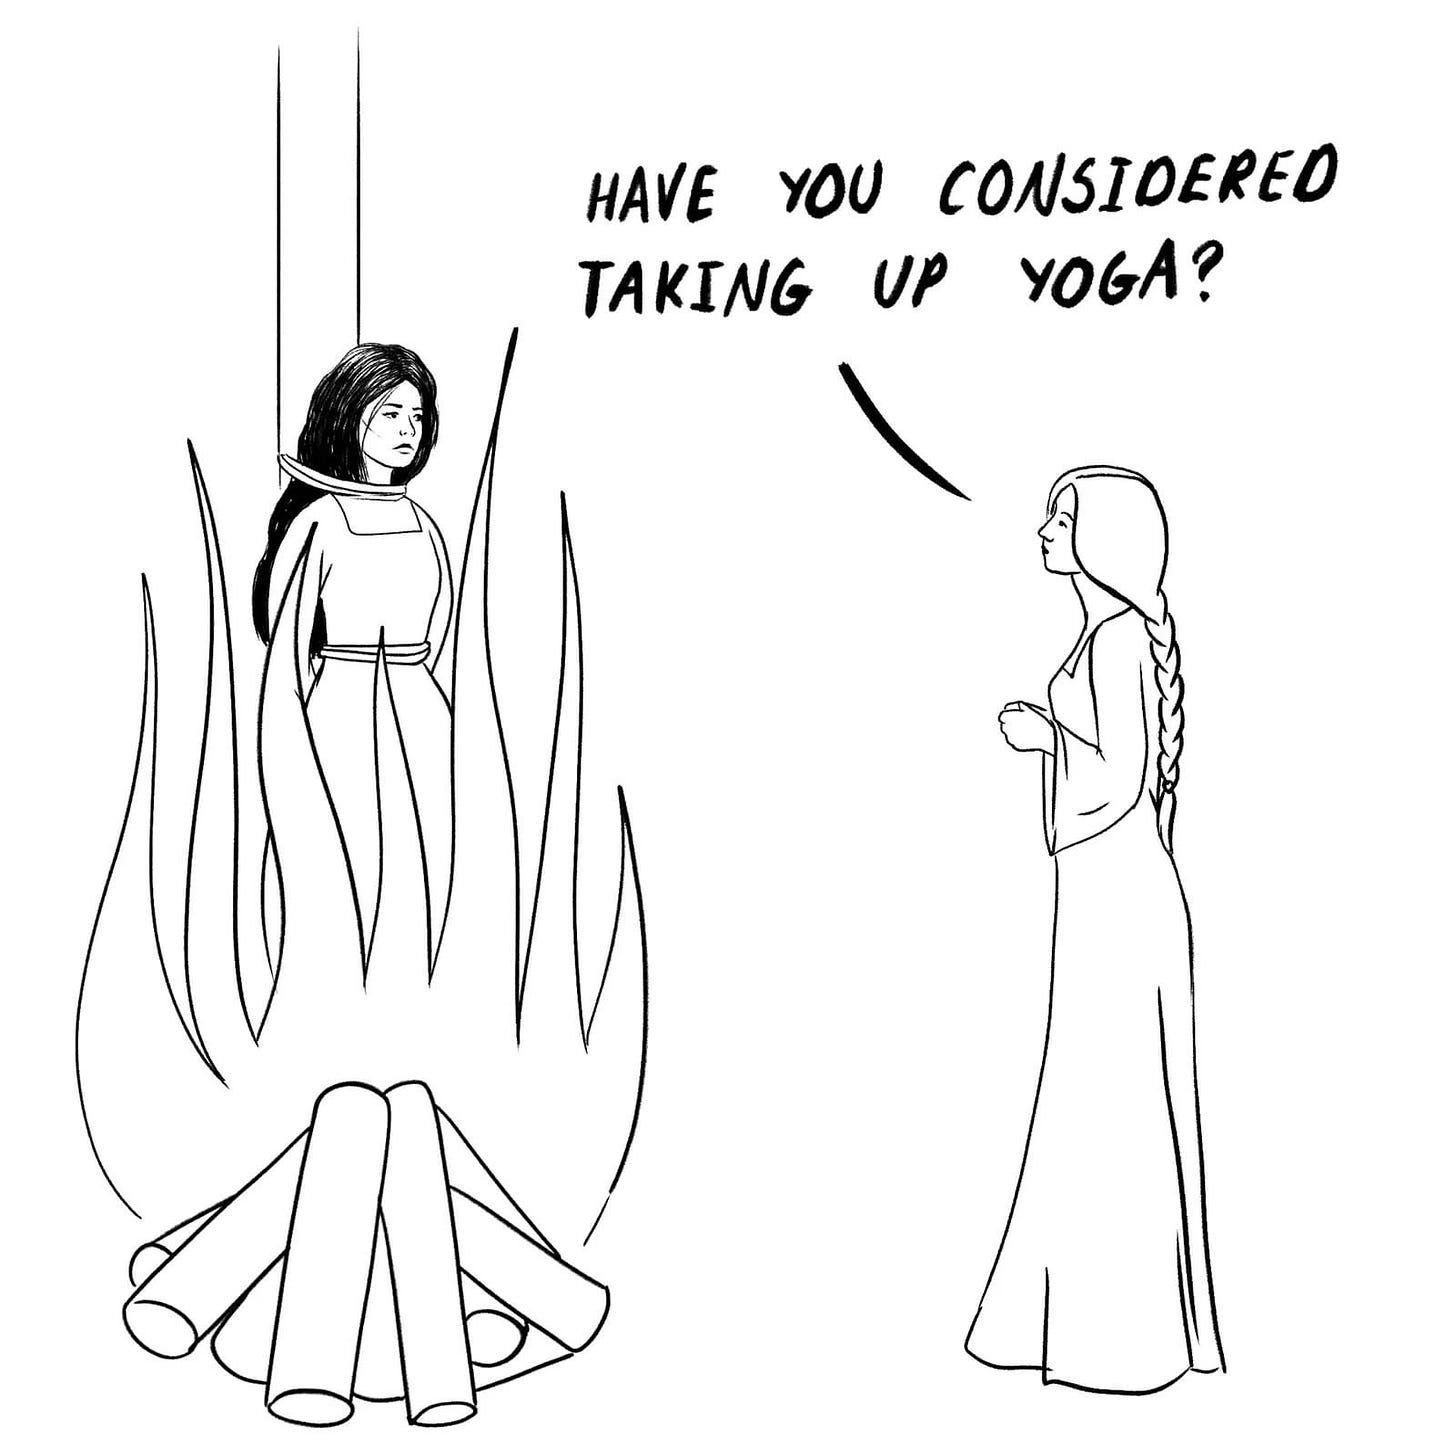 A line drawing of a woman telling another woman, who is being burned at the stake, “Have you considered taking up yoga?”